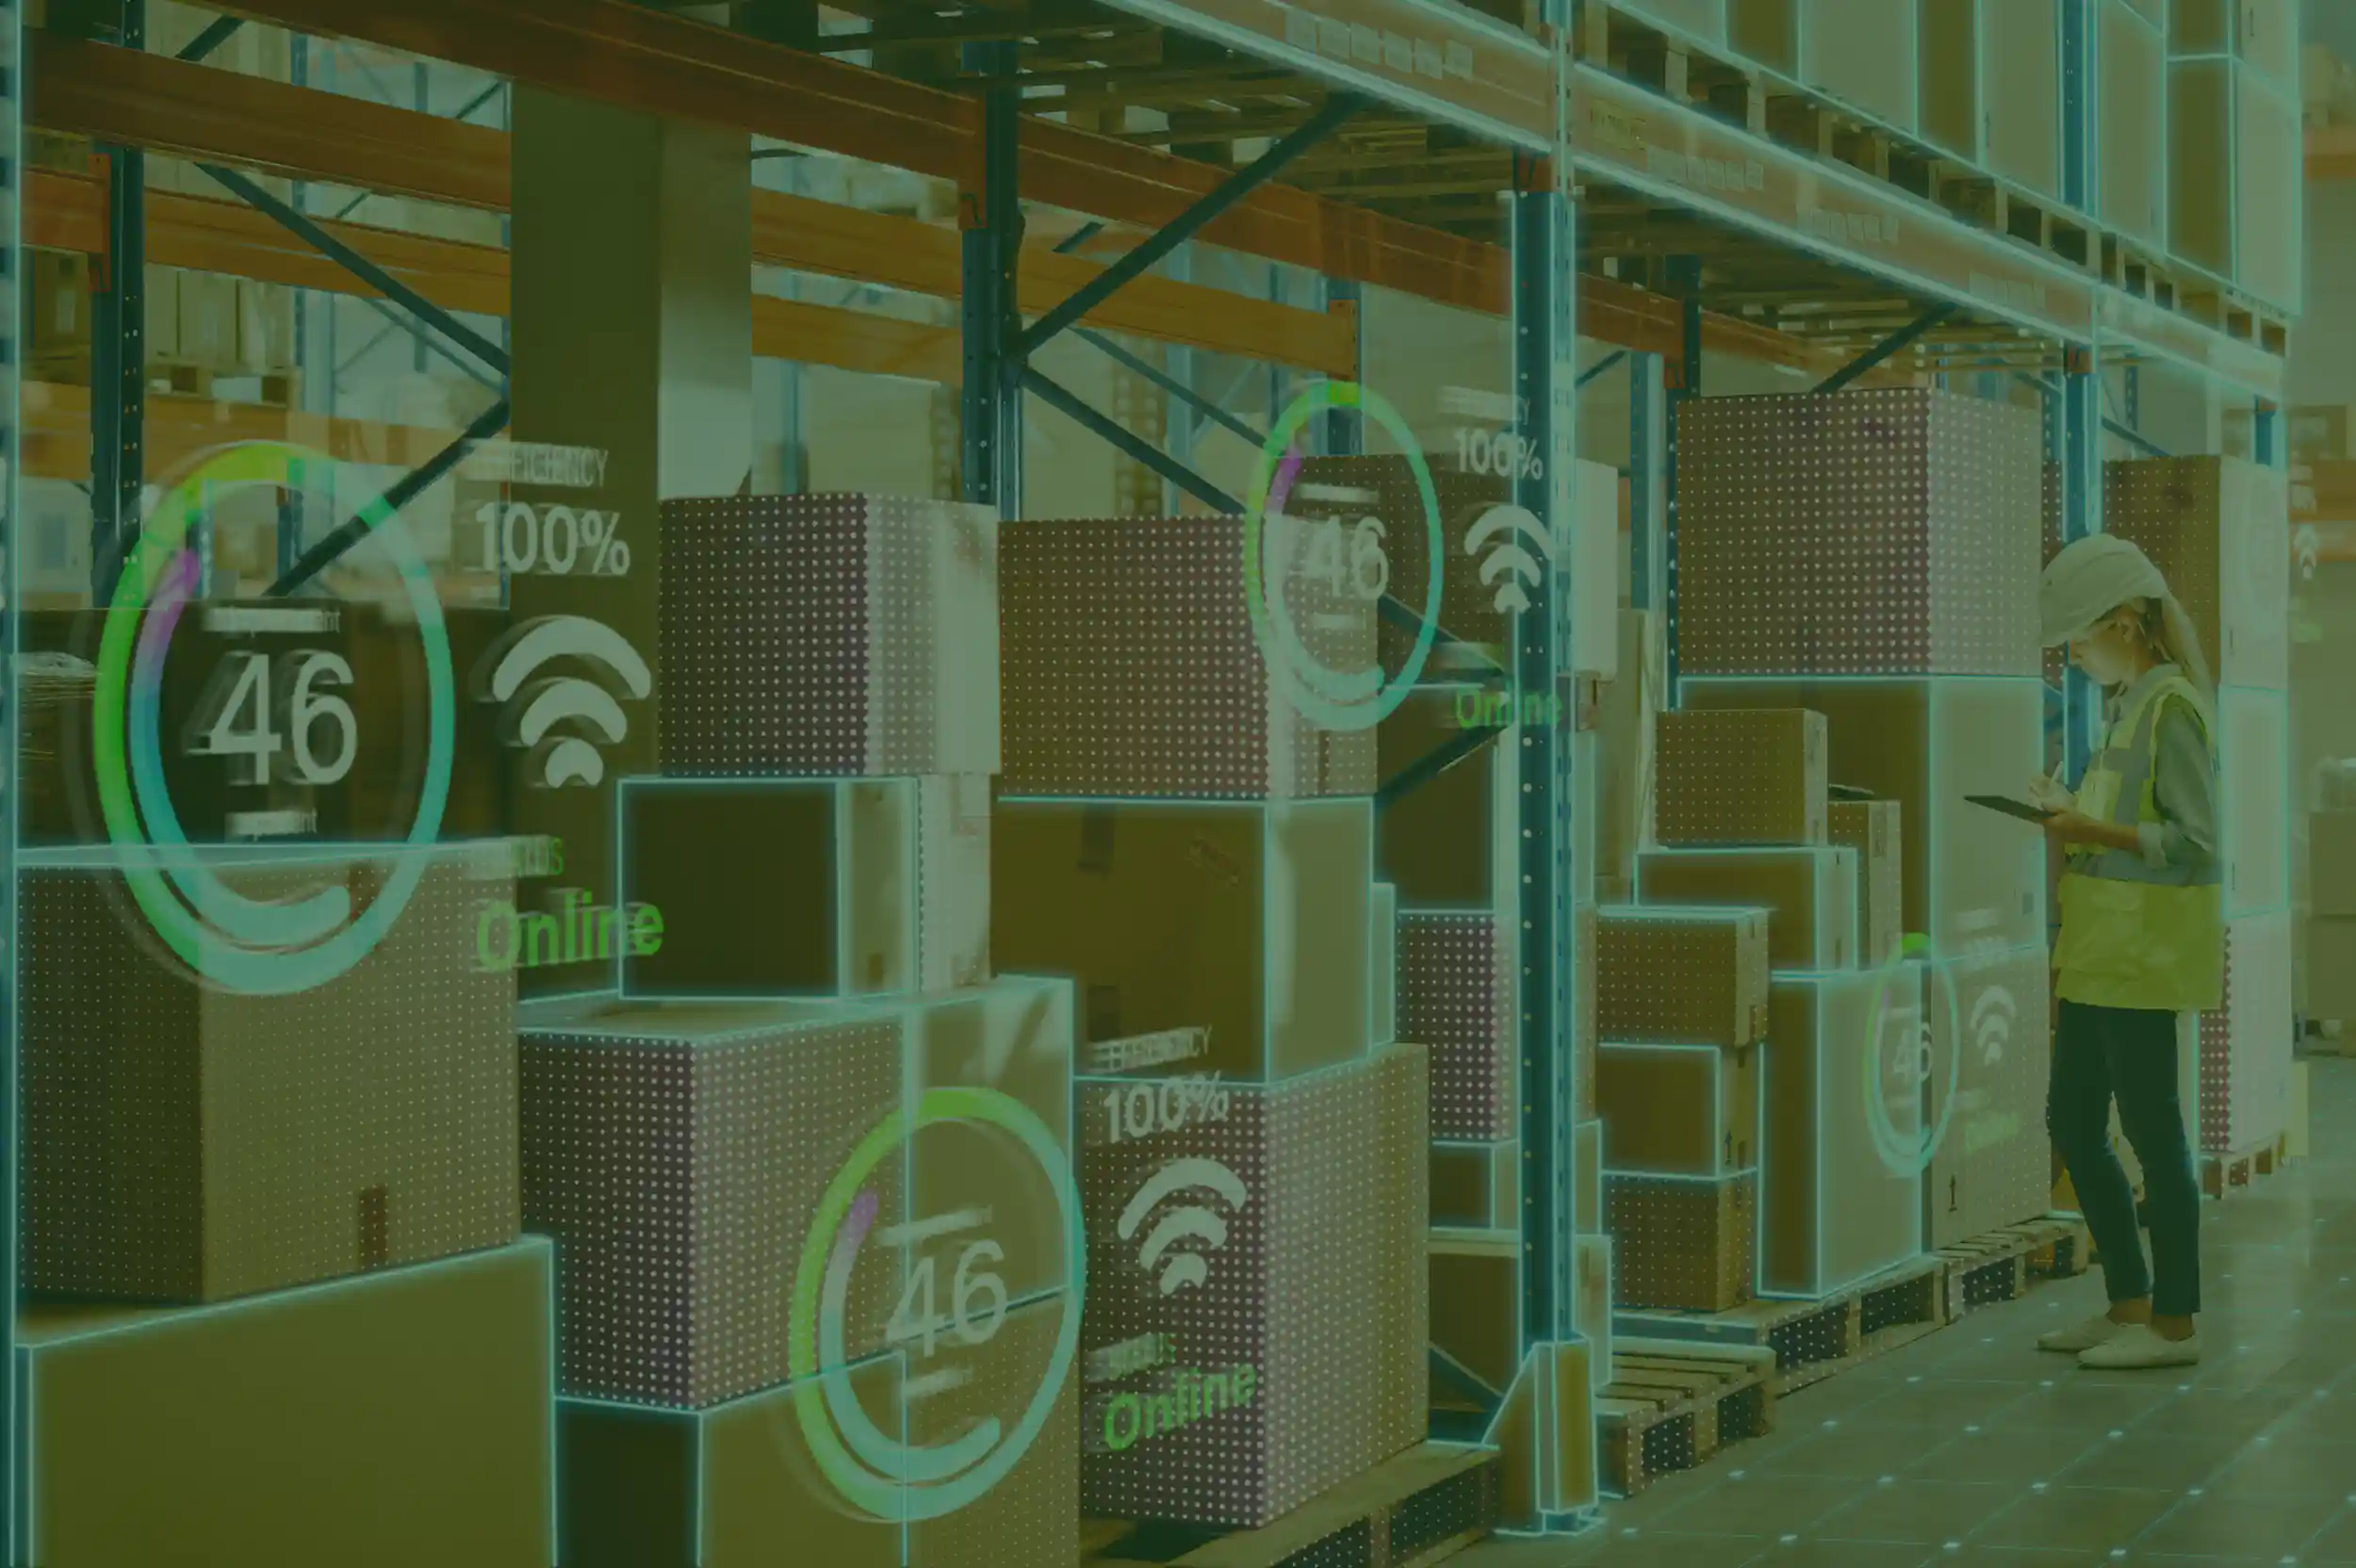 Warehouse manager monitoring and analyzing inventory using data